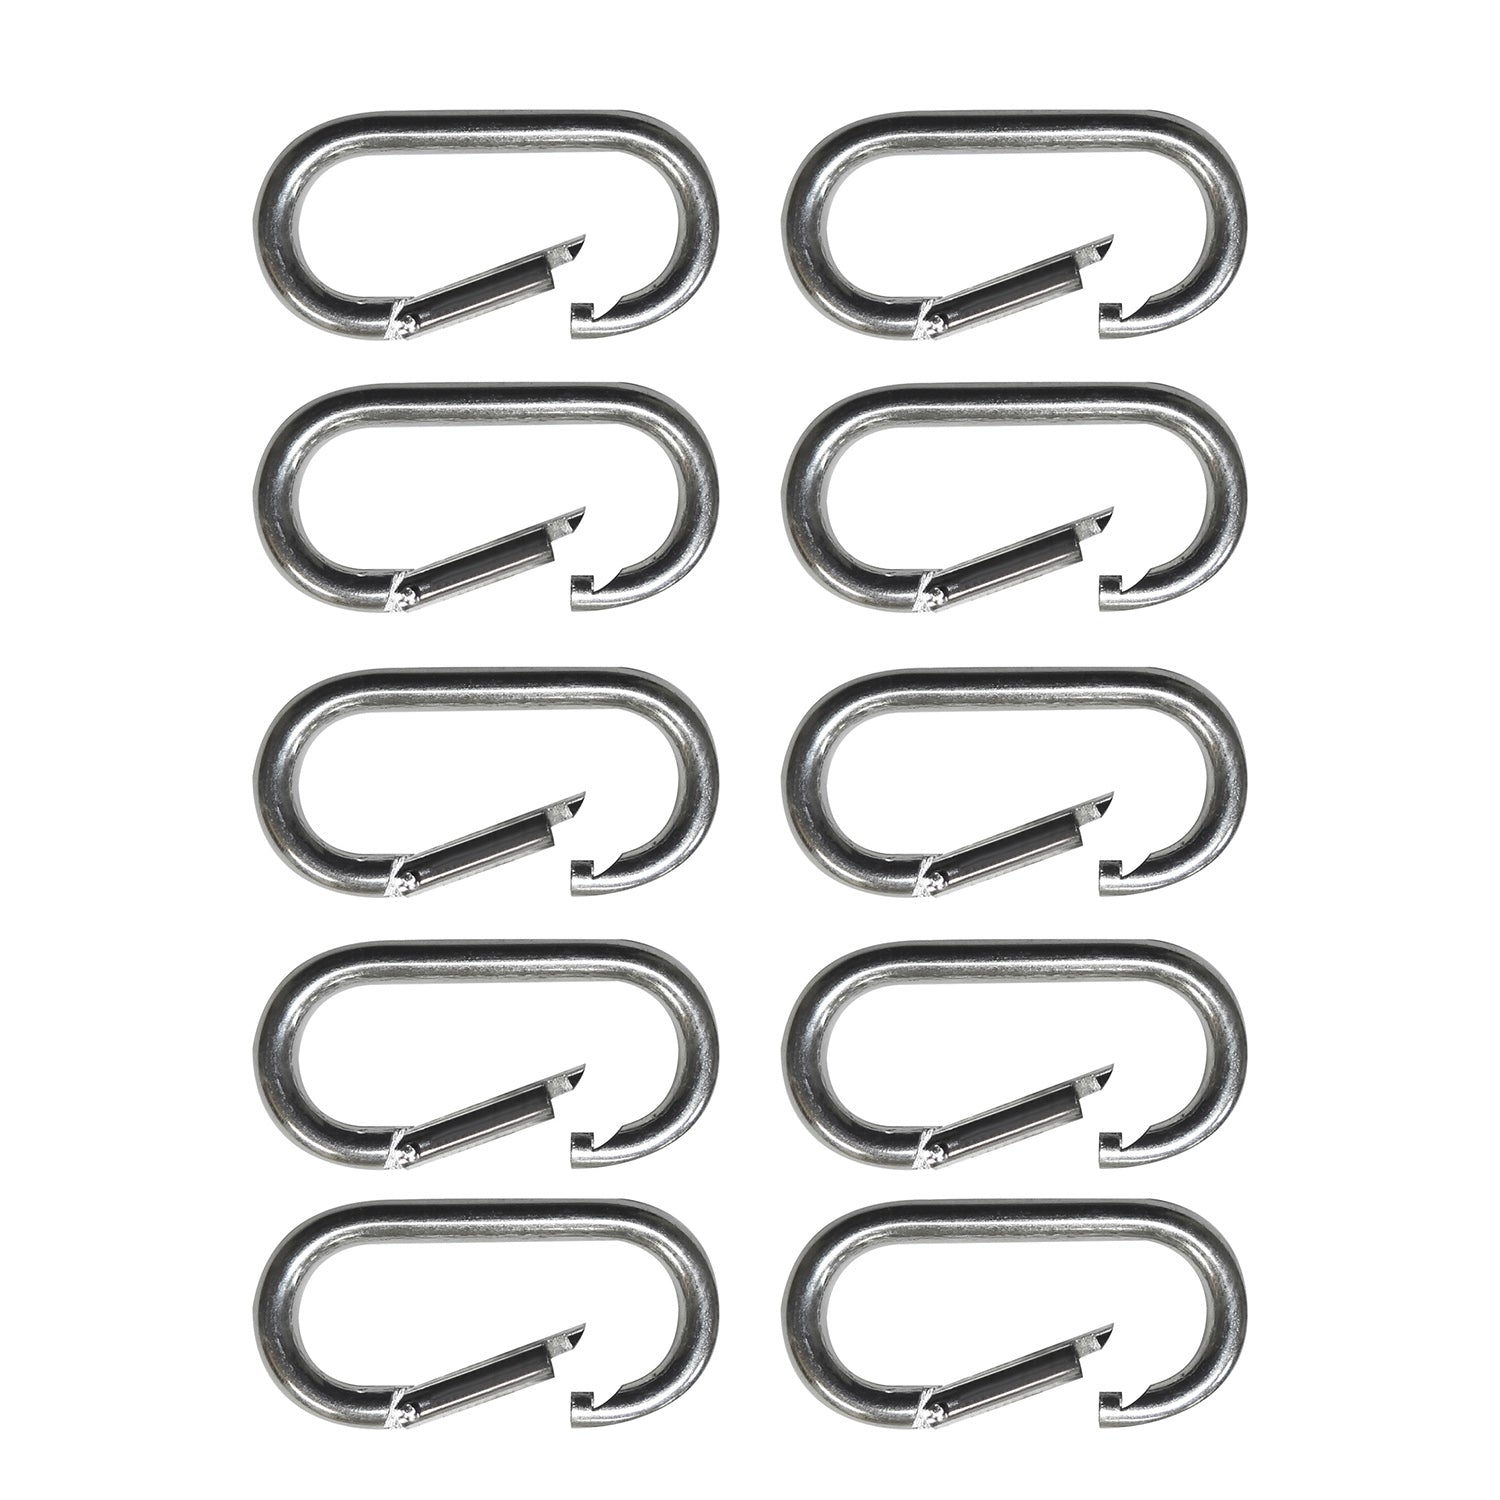 Snap-Hook Carabiner 1-1/2 x 3-1/8 Inch 10-Pack – SNAP-LOC CARGO